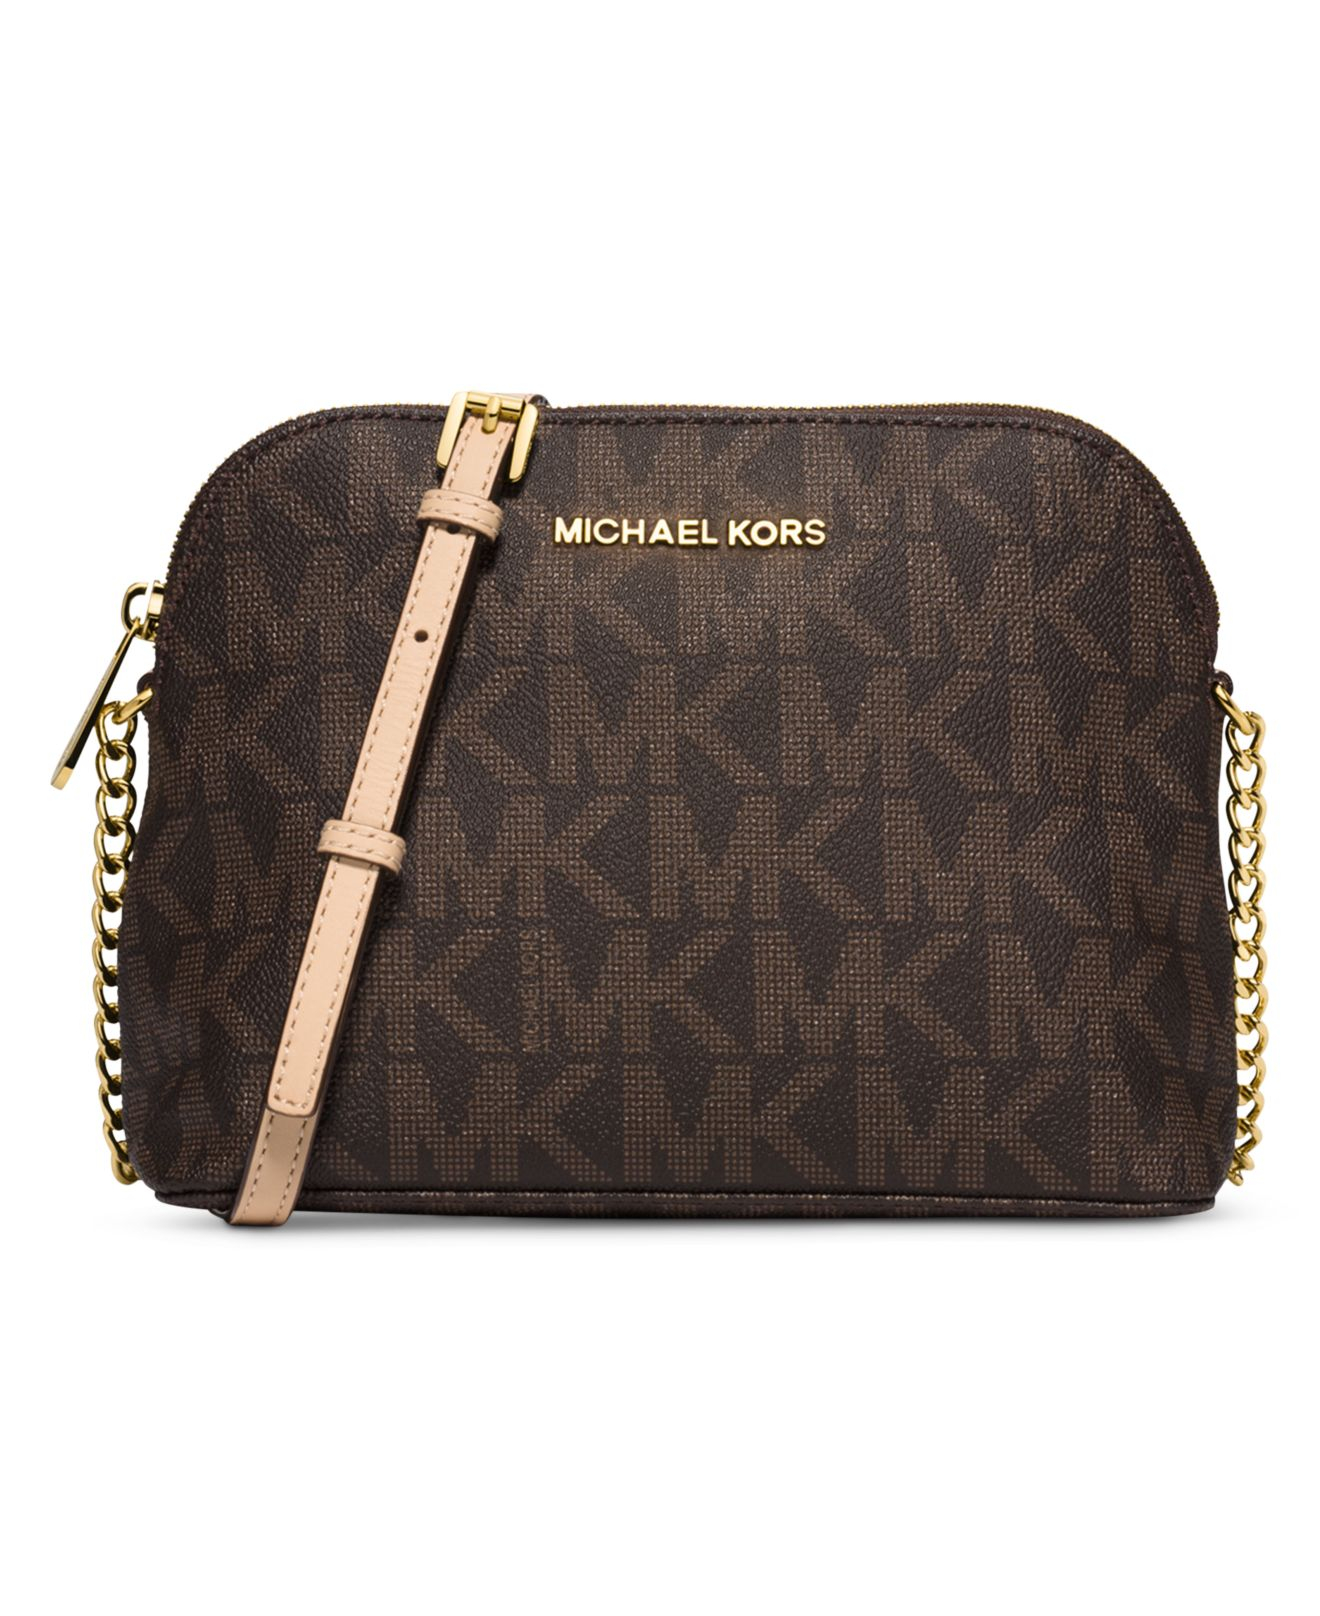 Michael kors Michael Cindy Large Dome Crossbody in Brown | Lyst